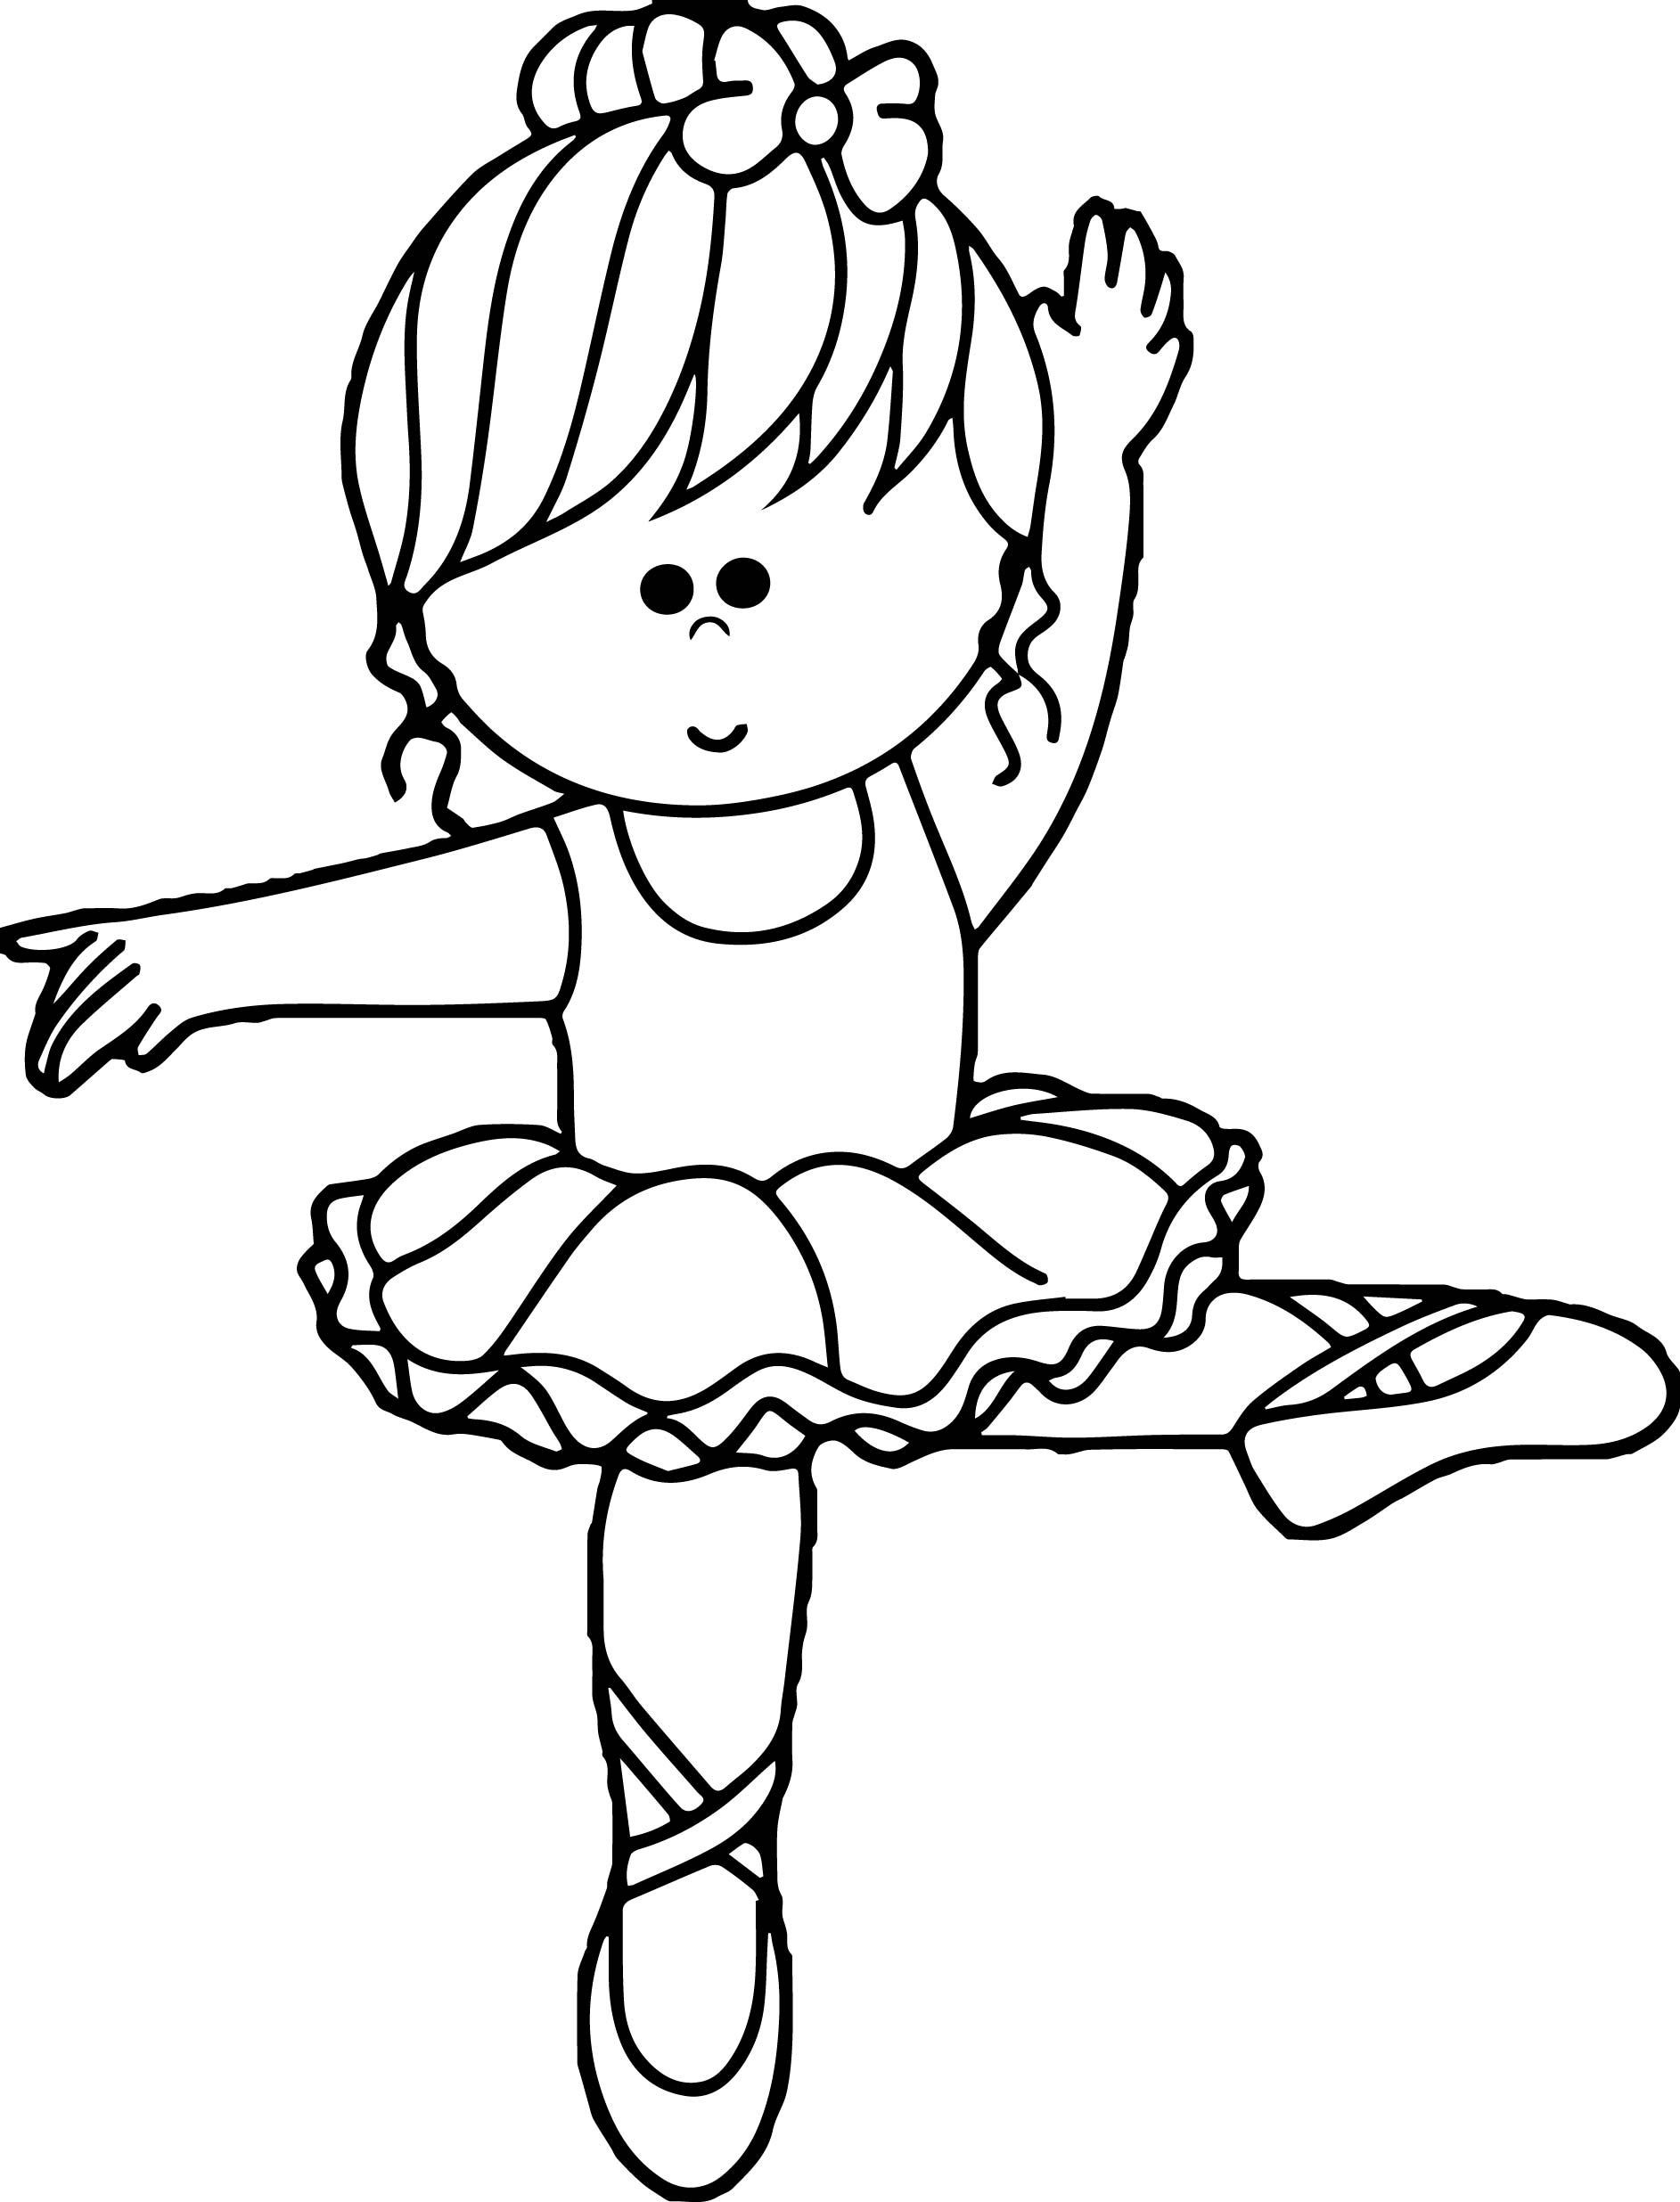 Ballerina Coloring Pages For Kids
 Cartoon Ballerina Coloring Page